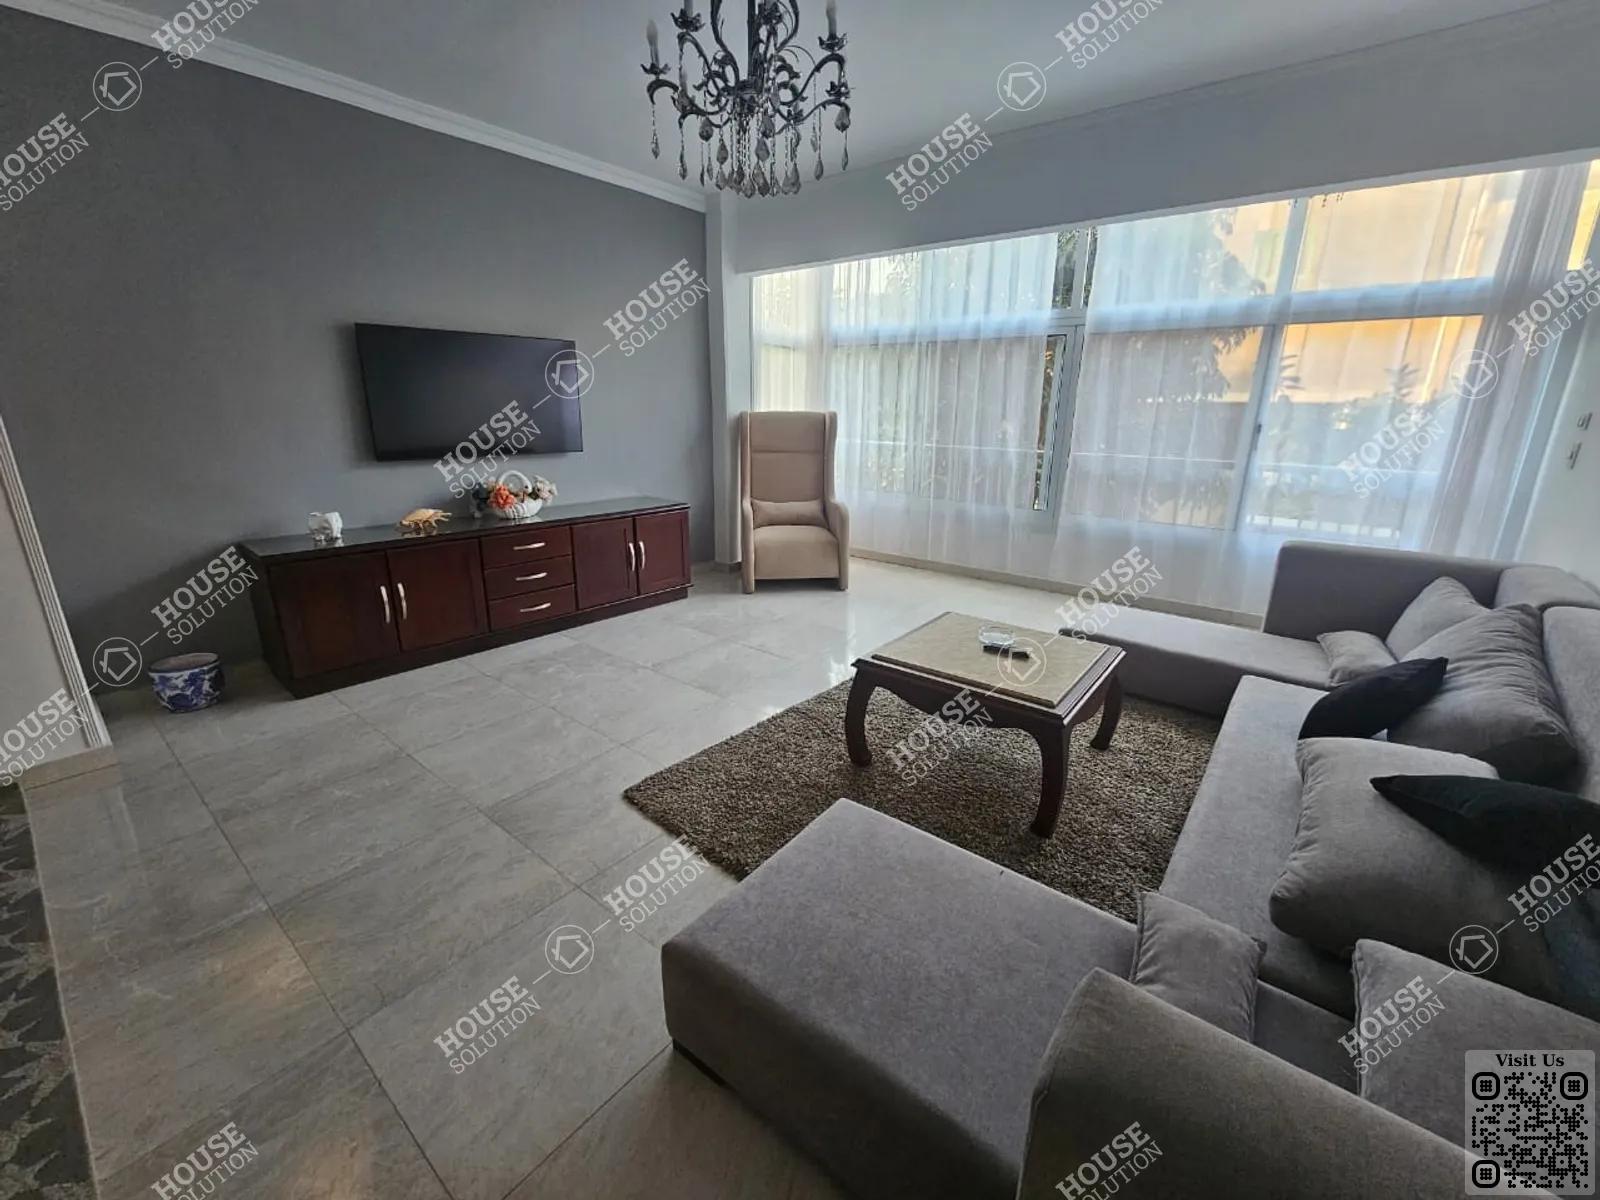 RECEPTION  @ Apartments For Rent In Maadi Maadi Degla Area: 250 m² consists of 3 Bedrooms 2 Bathrooms Modern furnished 5 stars #5808-0